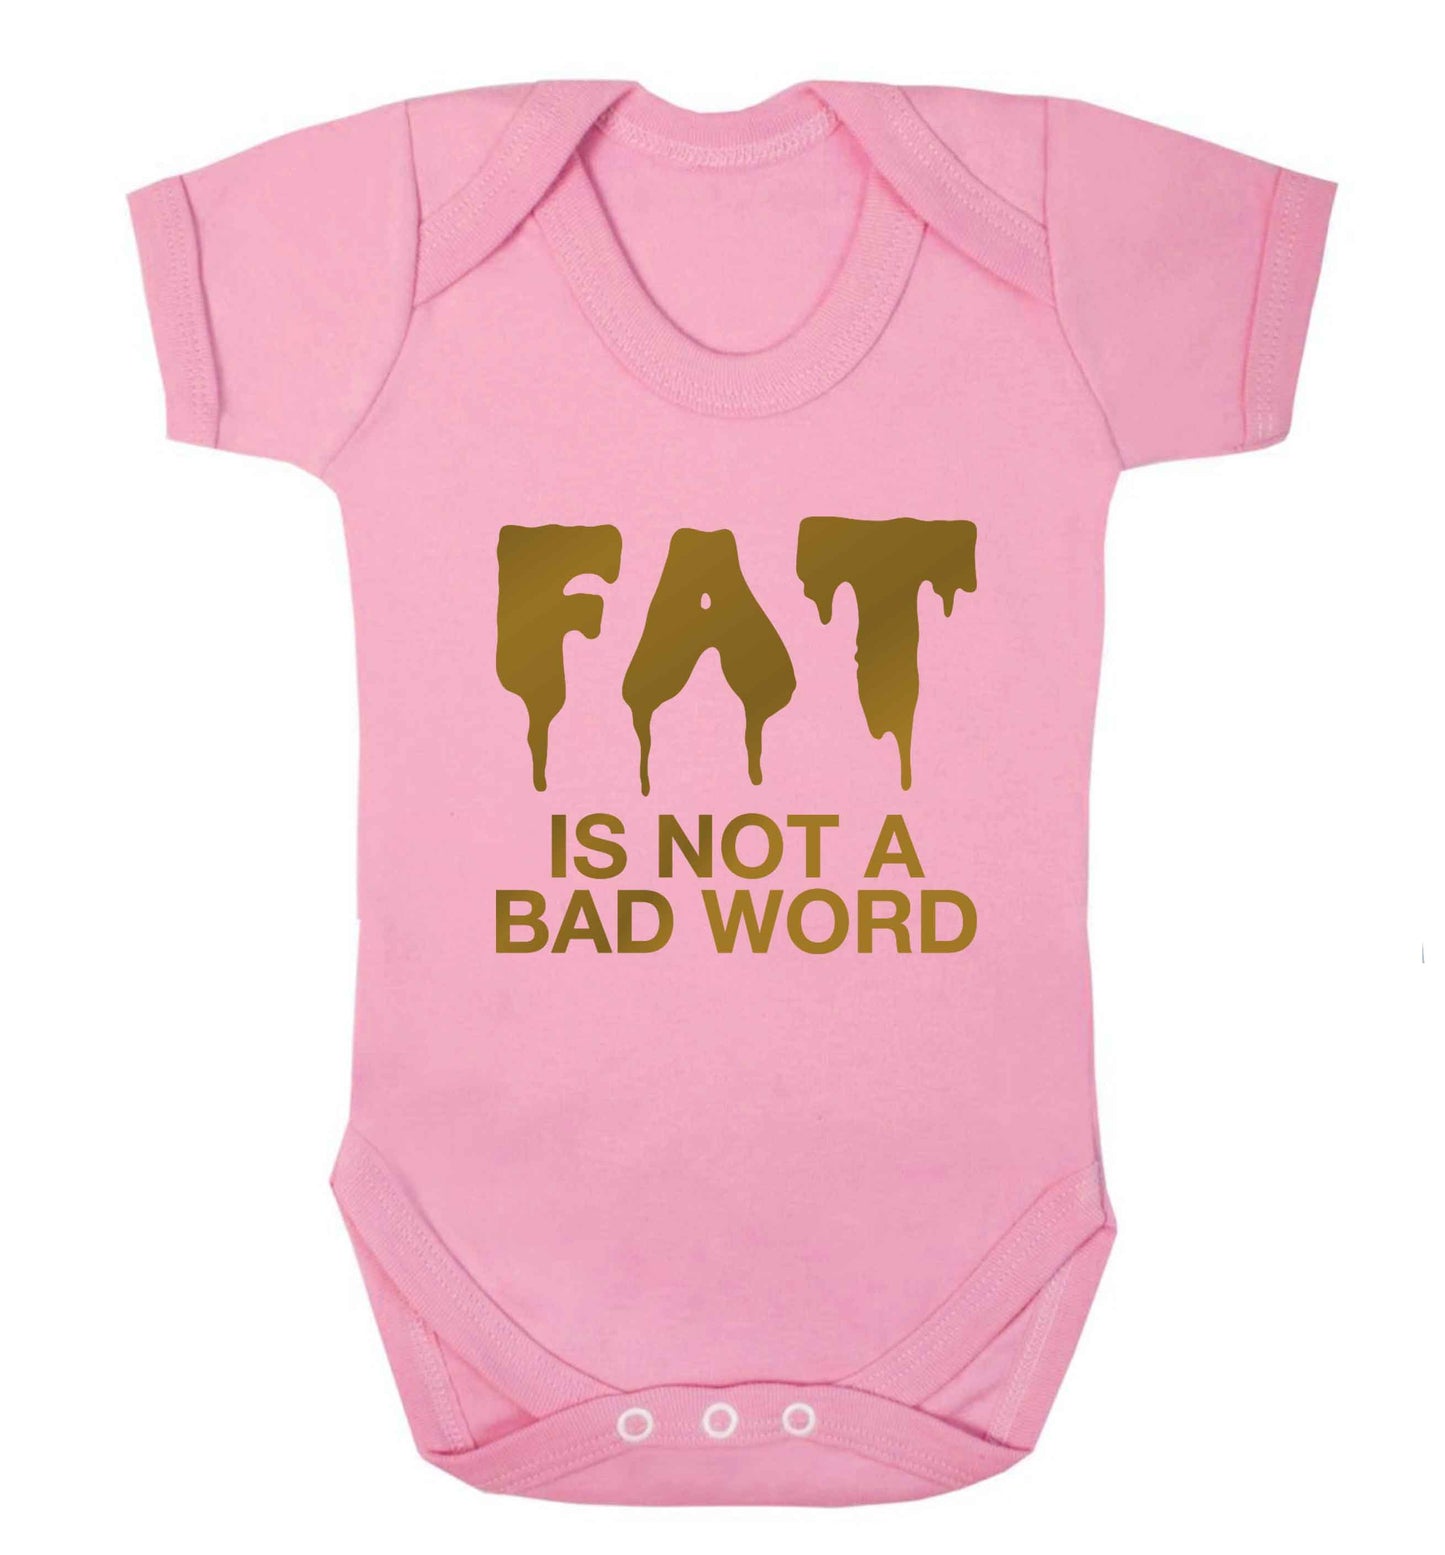 Fat is not a bad word baby vest pale pink 18-24 months